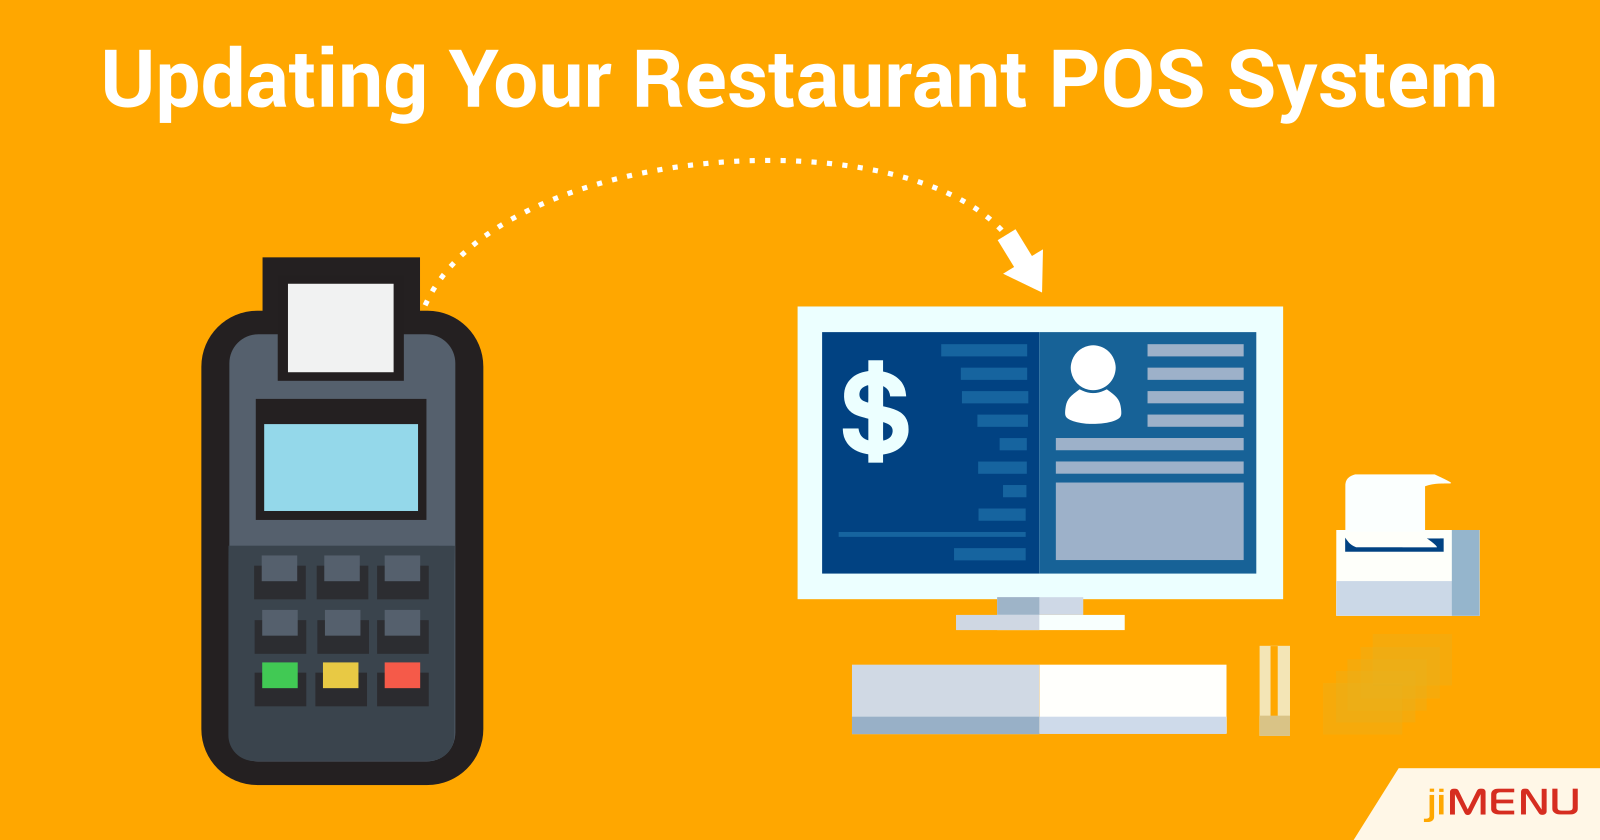 Why Do You Need to Update Your Restaurant POS System?